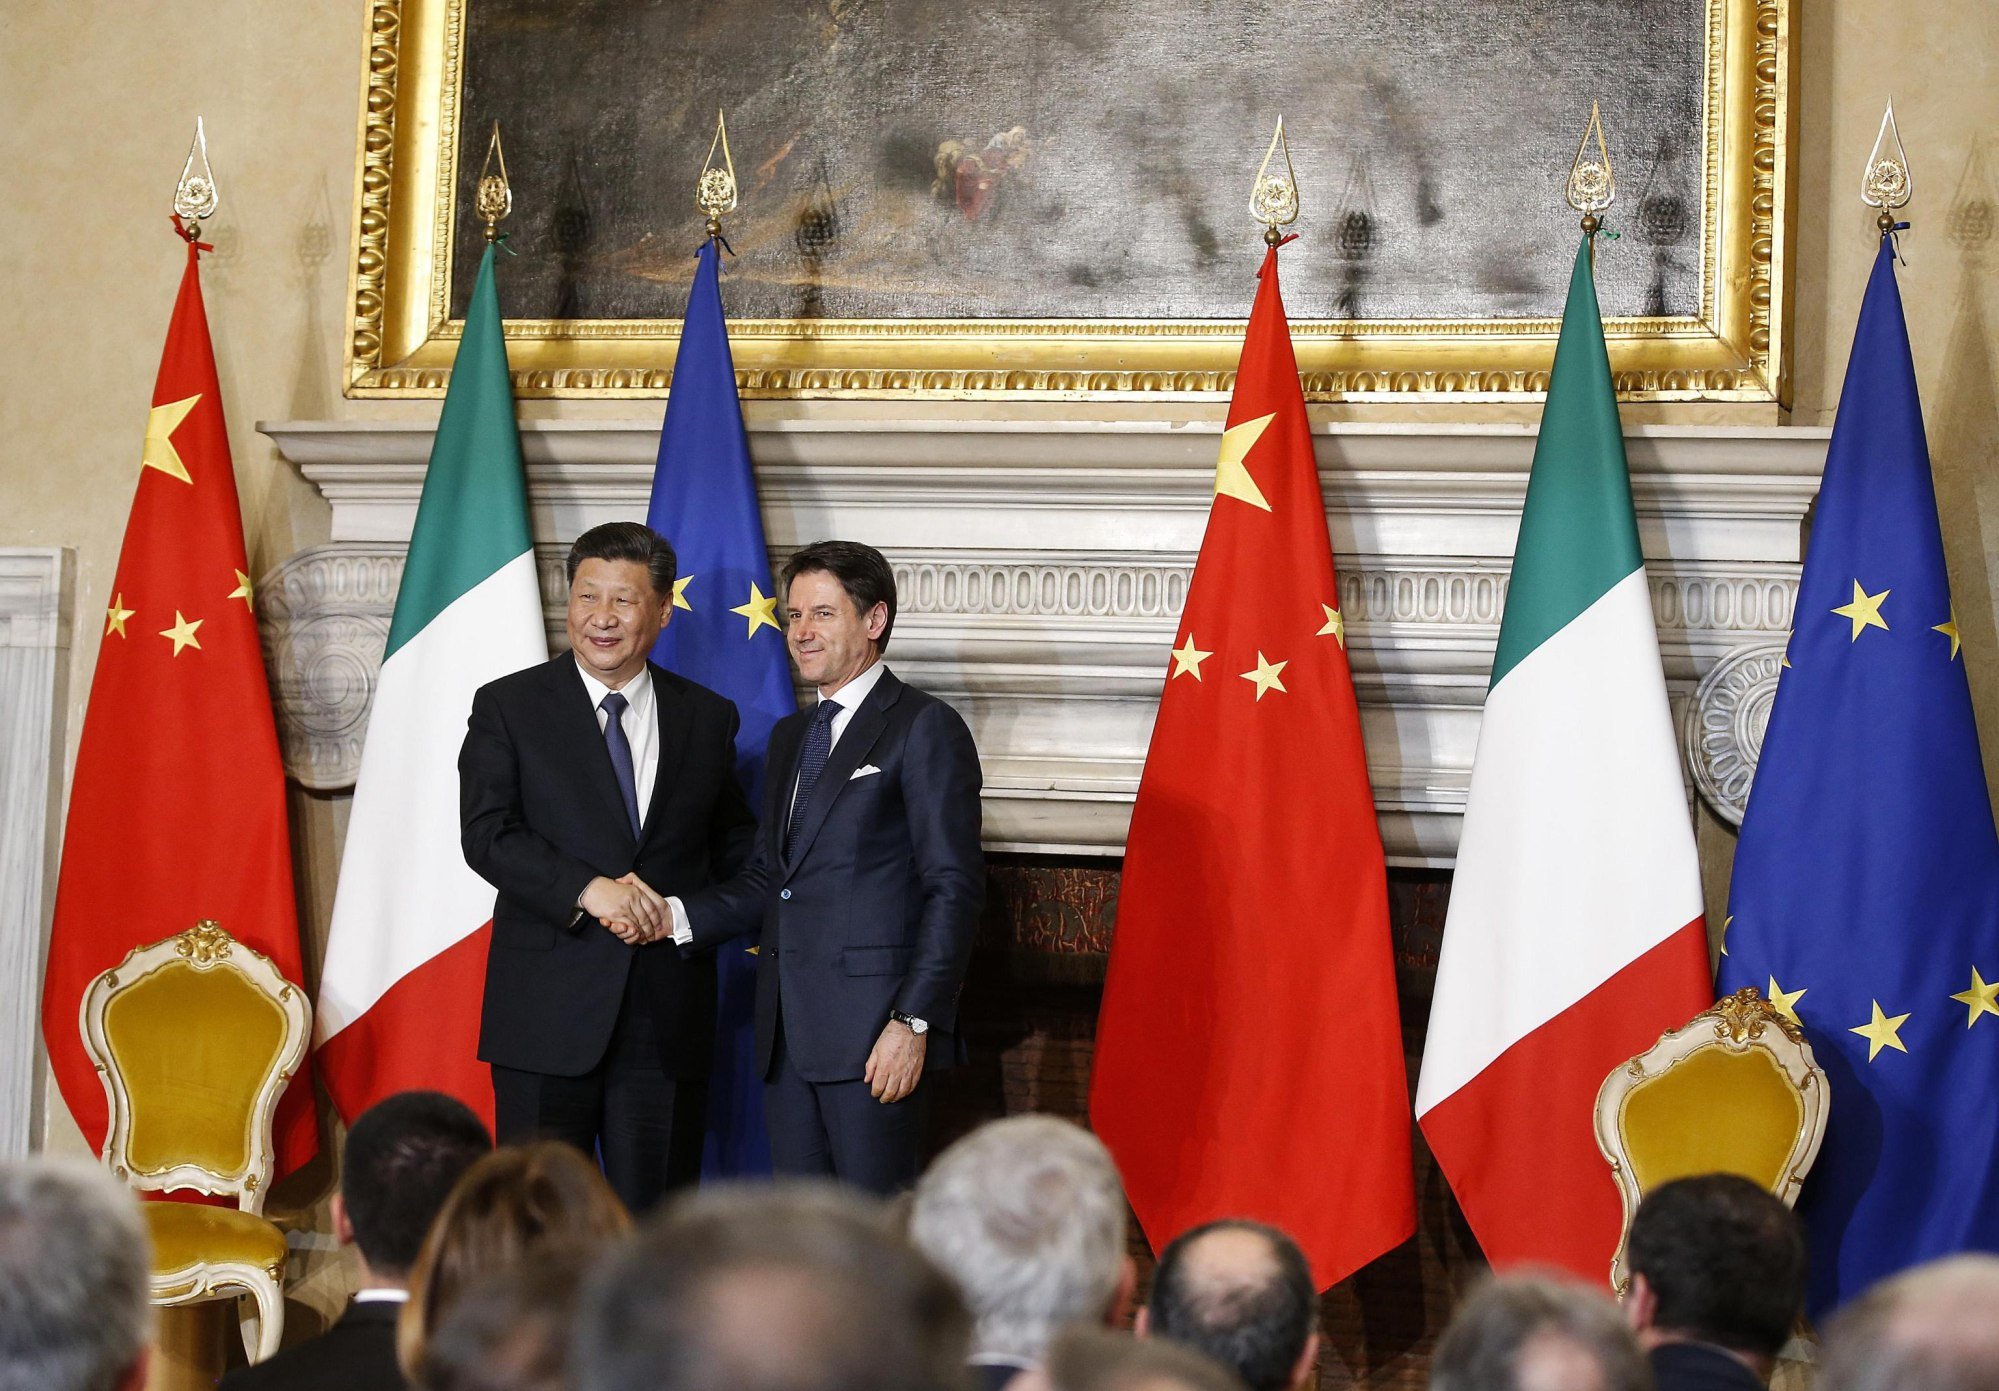 Italy’s then-prime minister Giuseppe Conte (right) hosts Chinese President Xi Jinping in Rome in March 2019 as Italy becomes the first G7 country to sign on to the belt and road plan. Photo: EPA-EFE